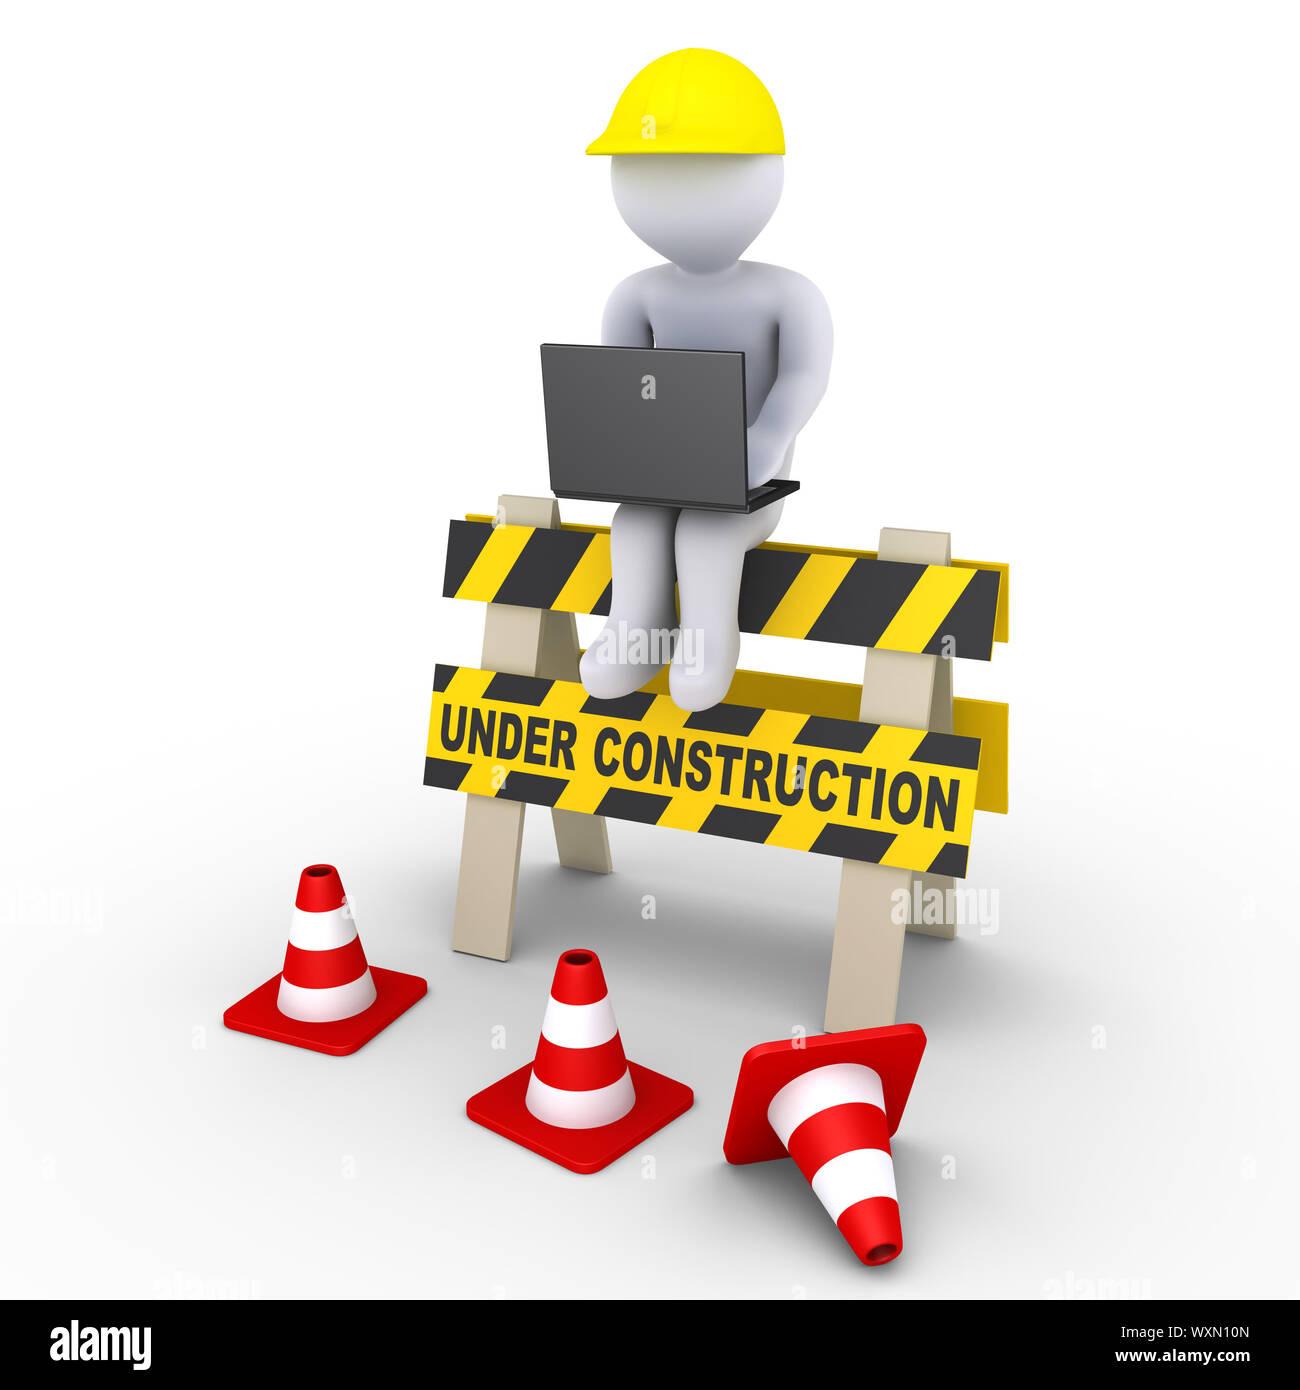 https://c8.alamy.com/comp/WXN10N/3d-worker-with-laptop-is-sitting-on-an-under-construction-sign-WXN10N.jpg